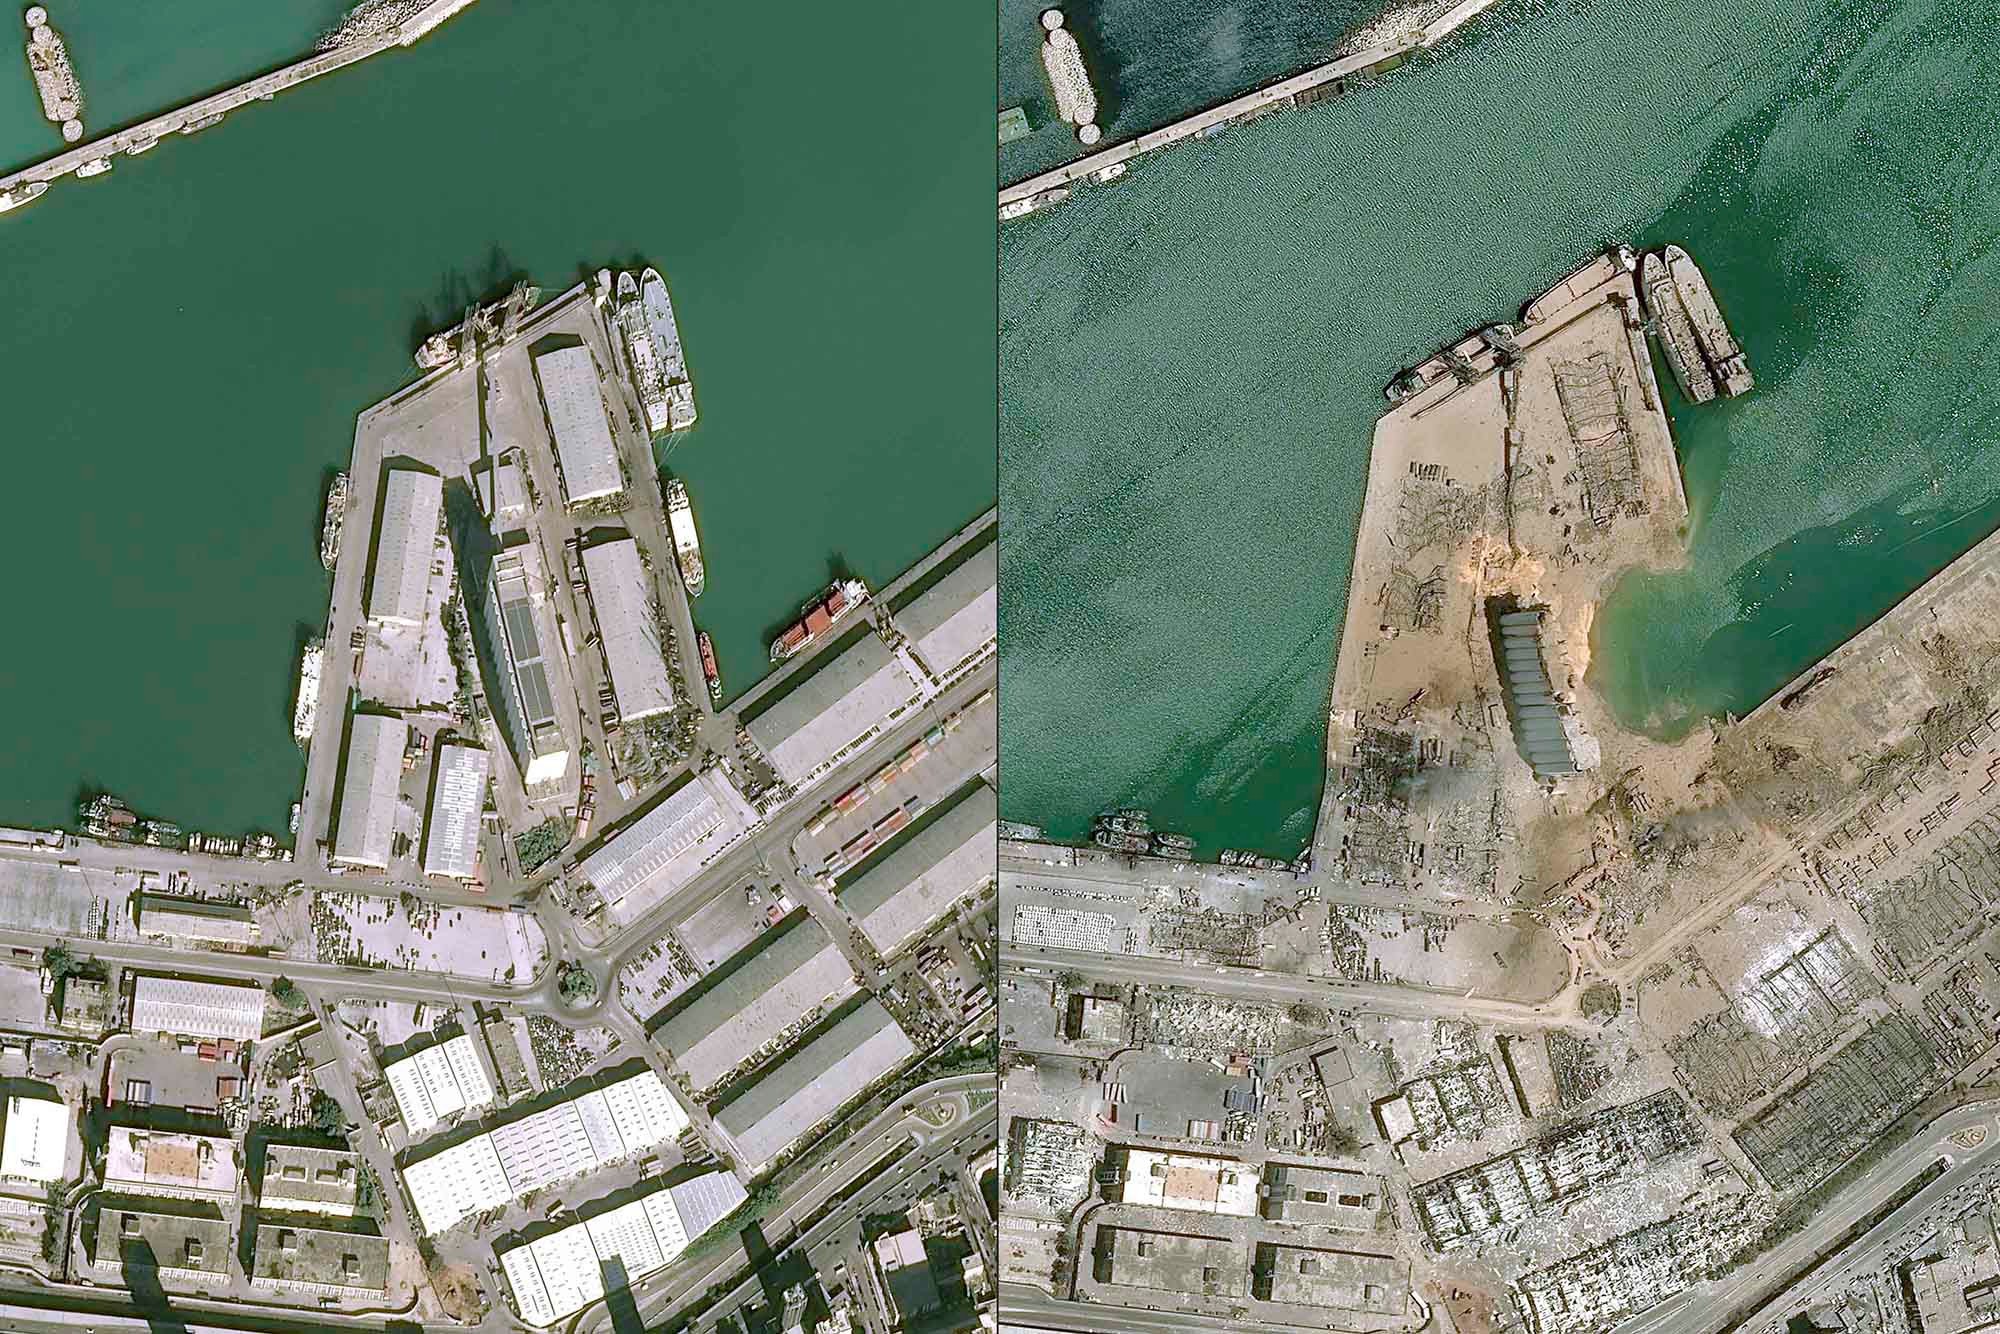 A before-and-after comparison image of a dock in Beirut after a massive explosion.